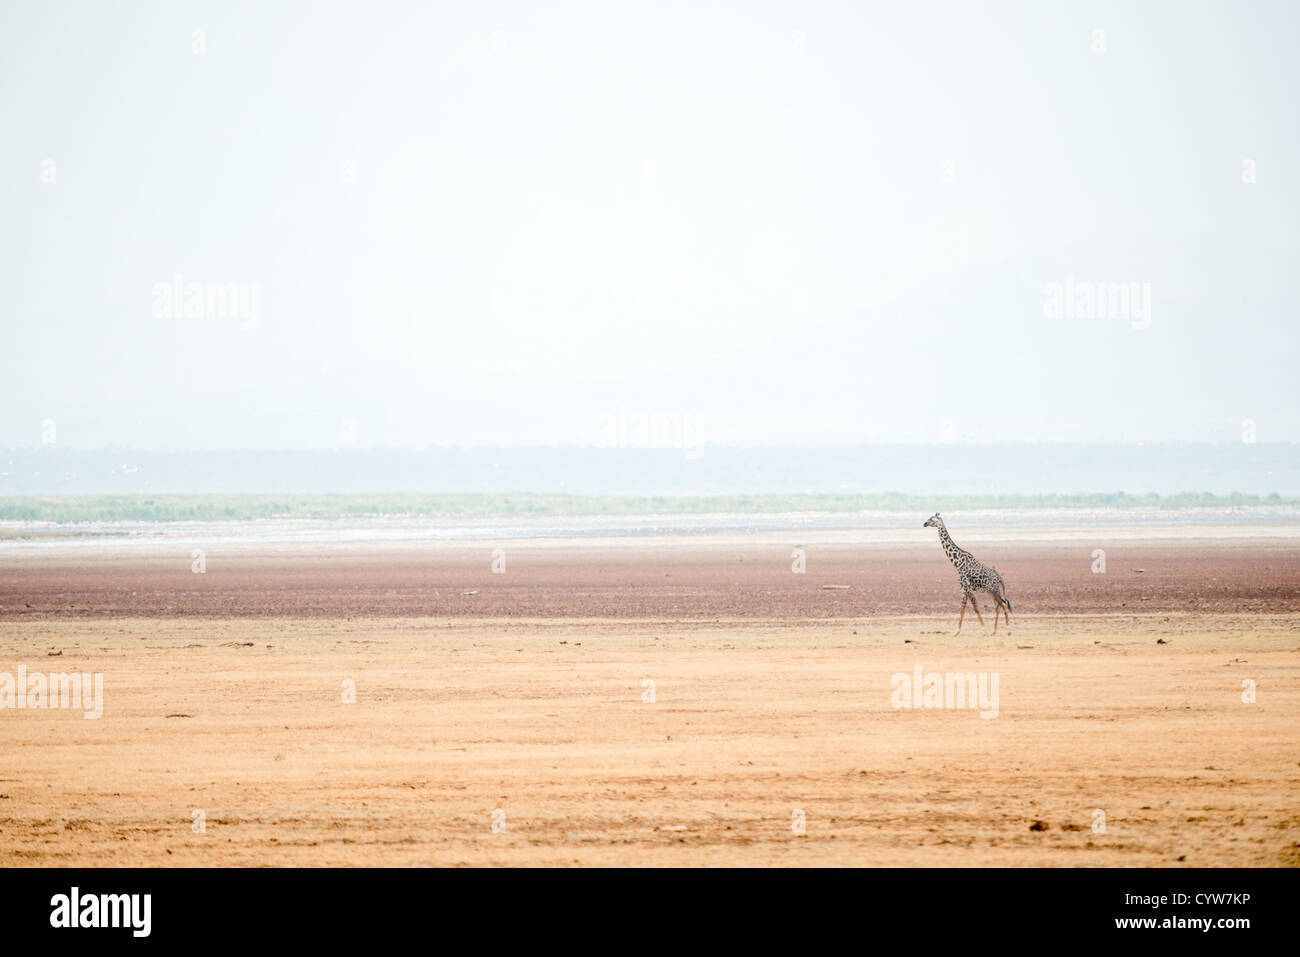 LAKE MANYARA NATIONAL PARK, Tanzania - LAKE MANA solitary giraffe walks past the salt lake in the distance at Lake Manyara National Park in northern Tanzania. The park, known for tree-climbing lions and flamingos, plays a crucial role in the conservation of Tanzania's diverse species and ecosystems. Stock Photo